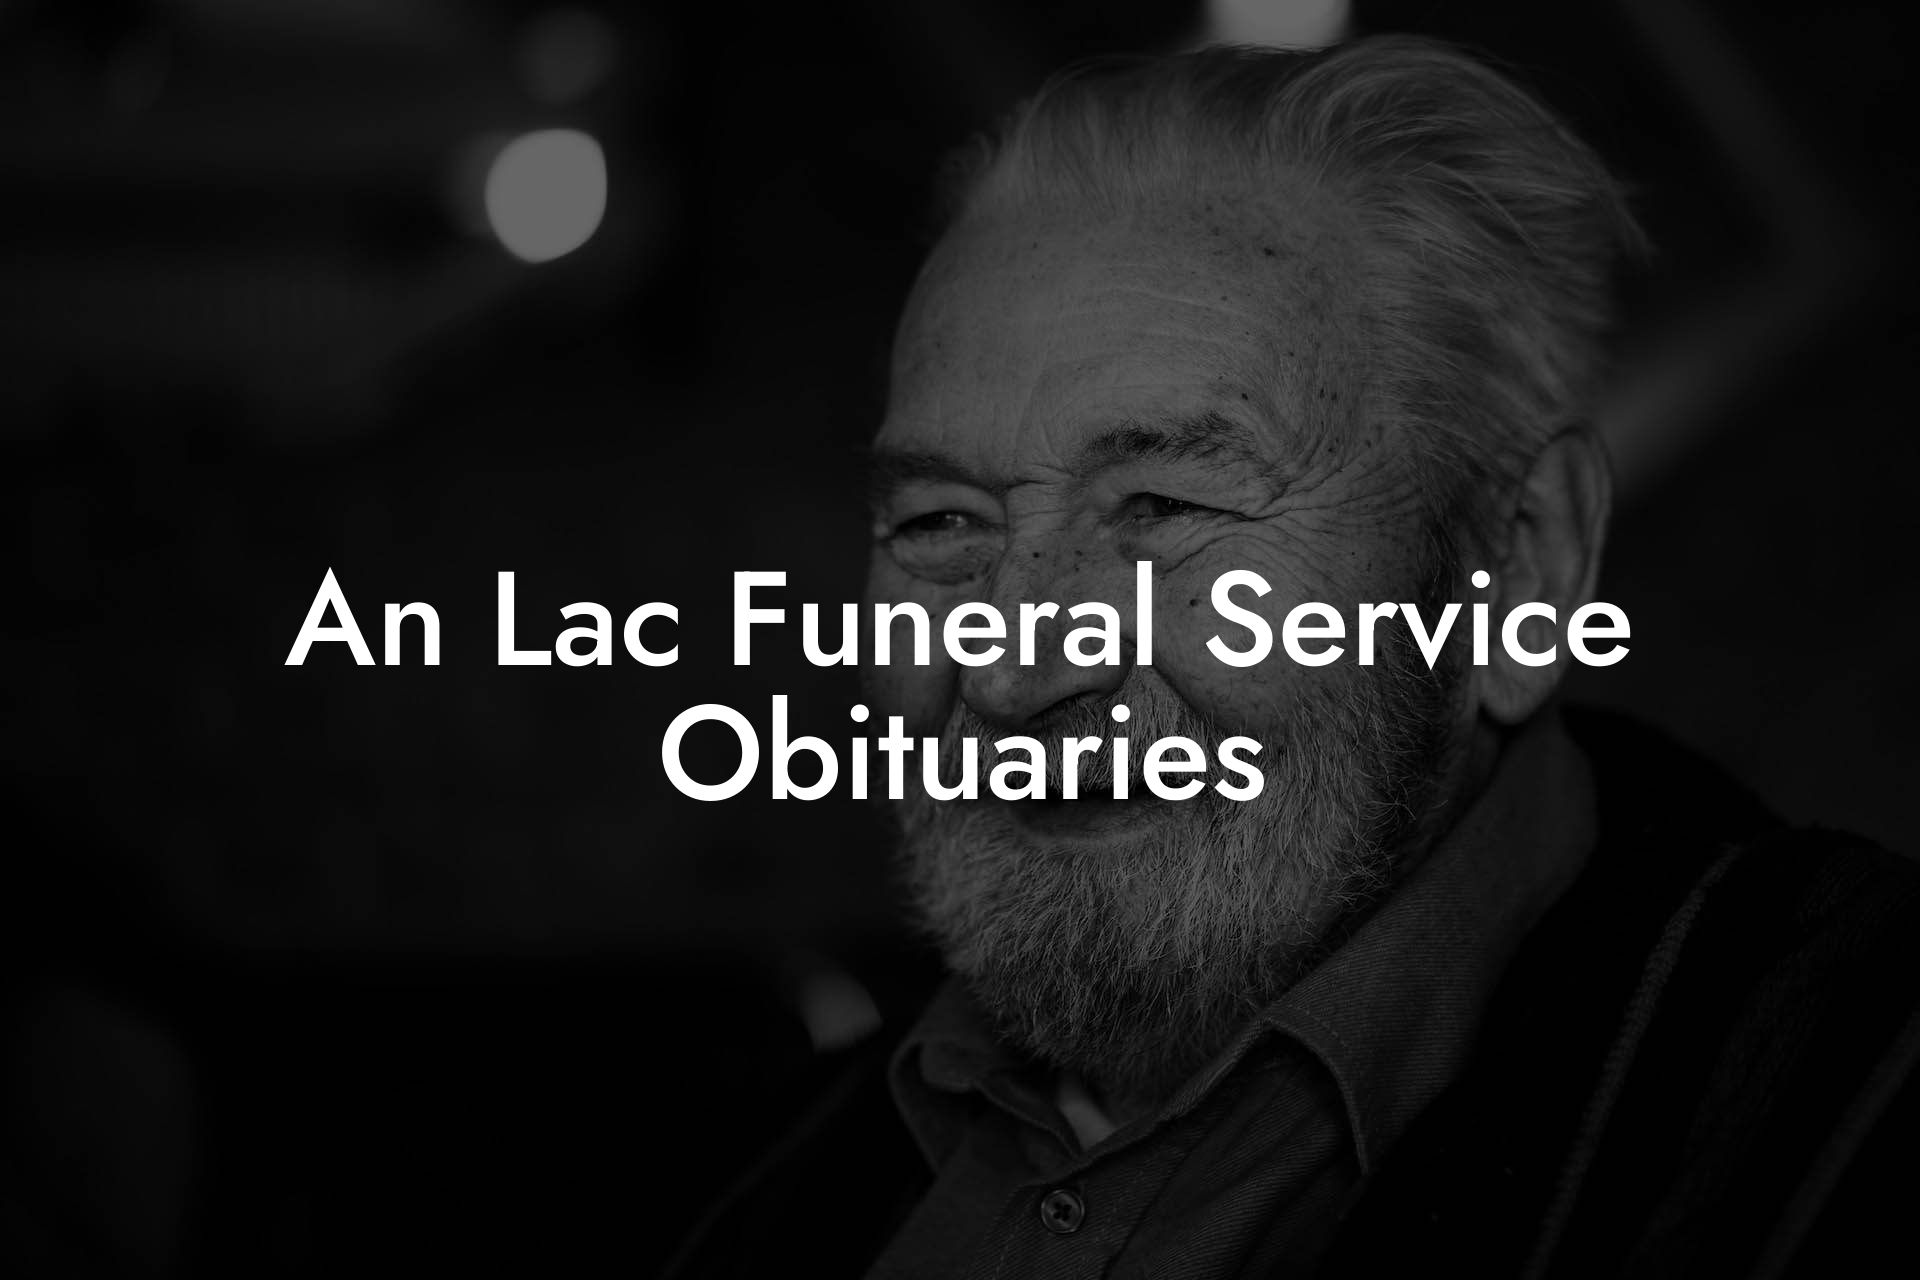 An Lac Funeral Service Obituaries